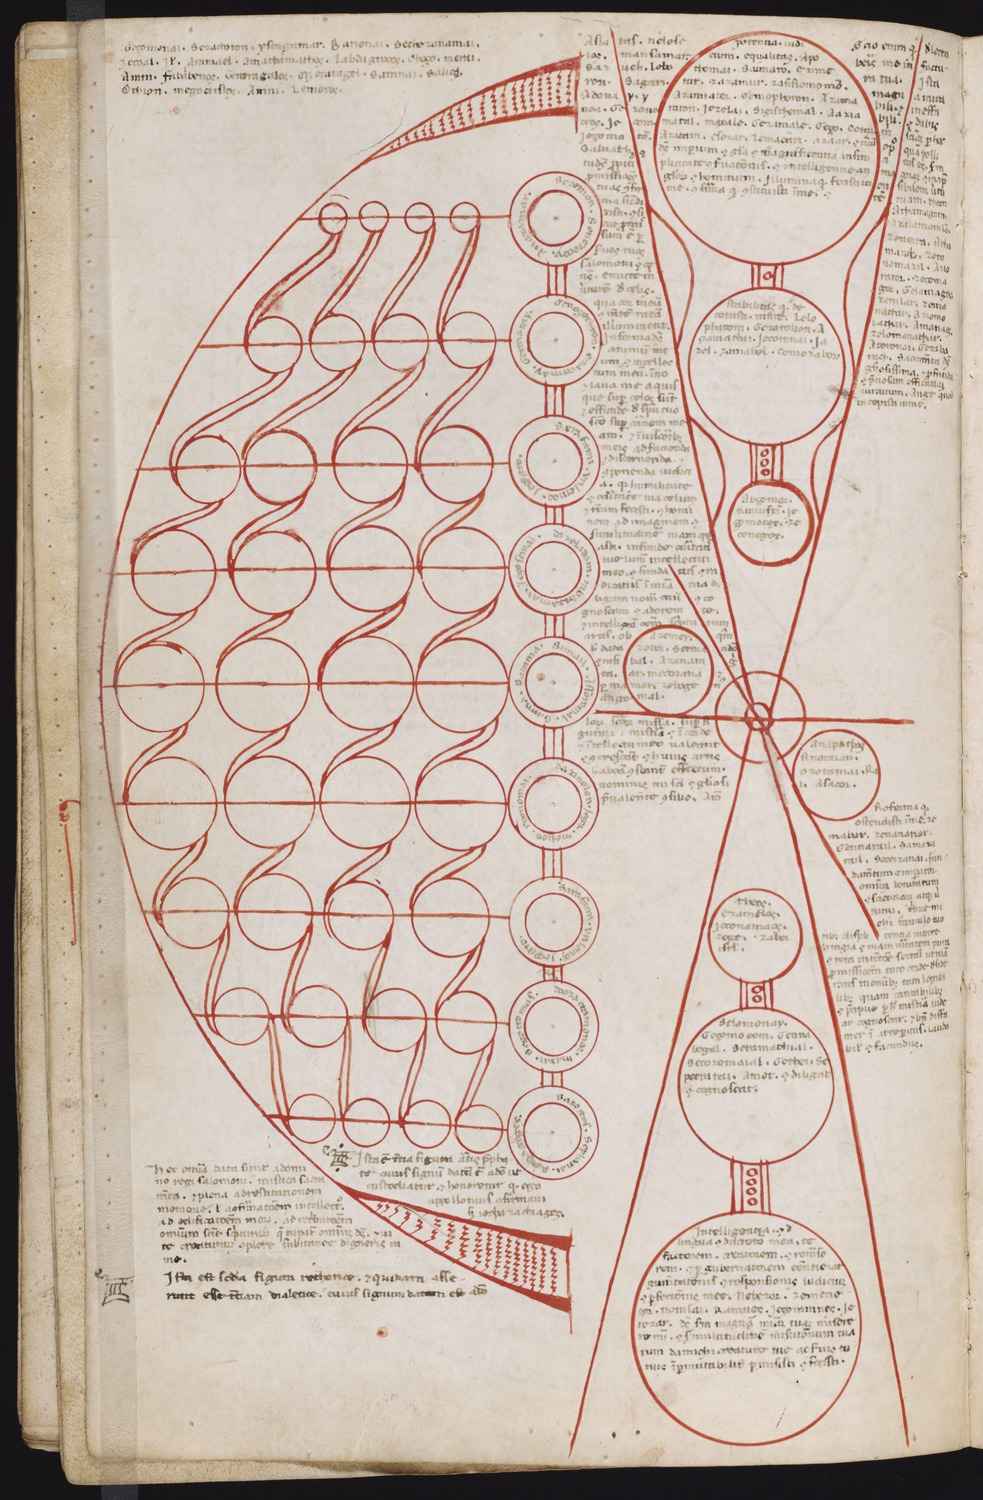 Pg13 of Mellon MS 1 manuscript of Ars notoria, sive Flores aurei (“The Art of Magic or Golden Flowers”), alchemical text ascribed to Apollonius of Tyana